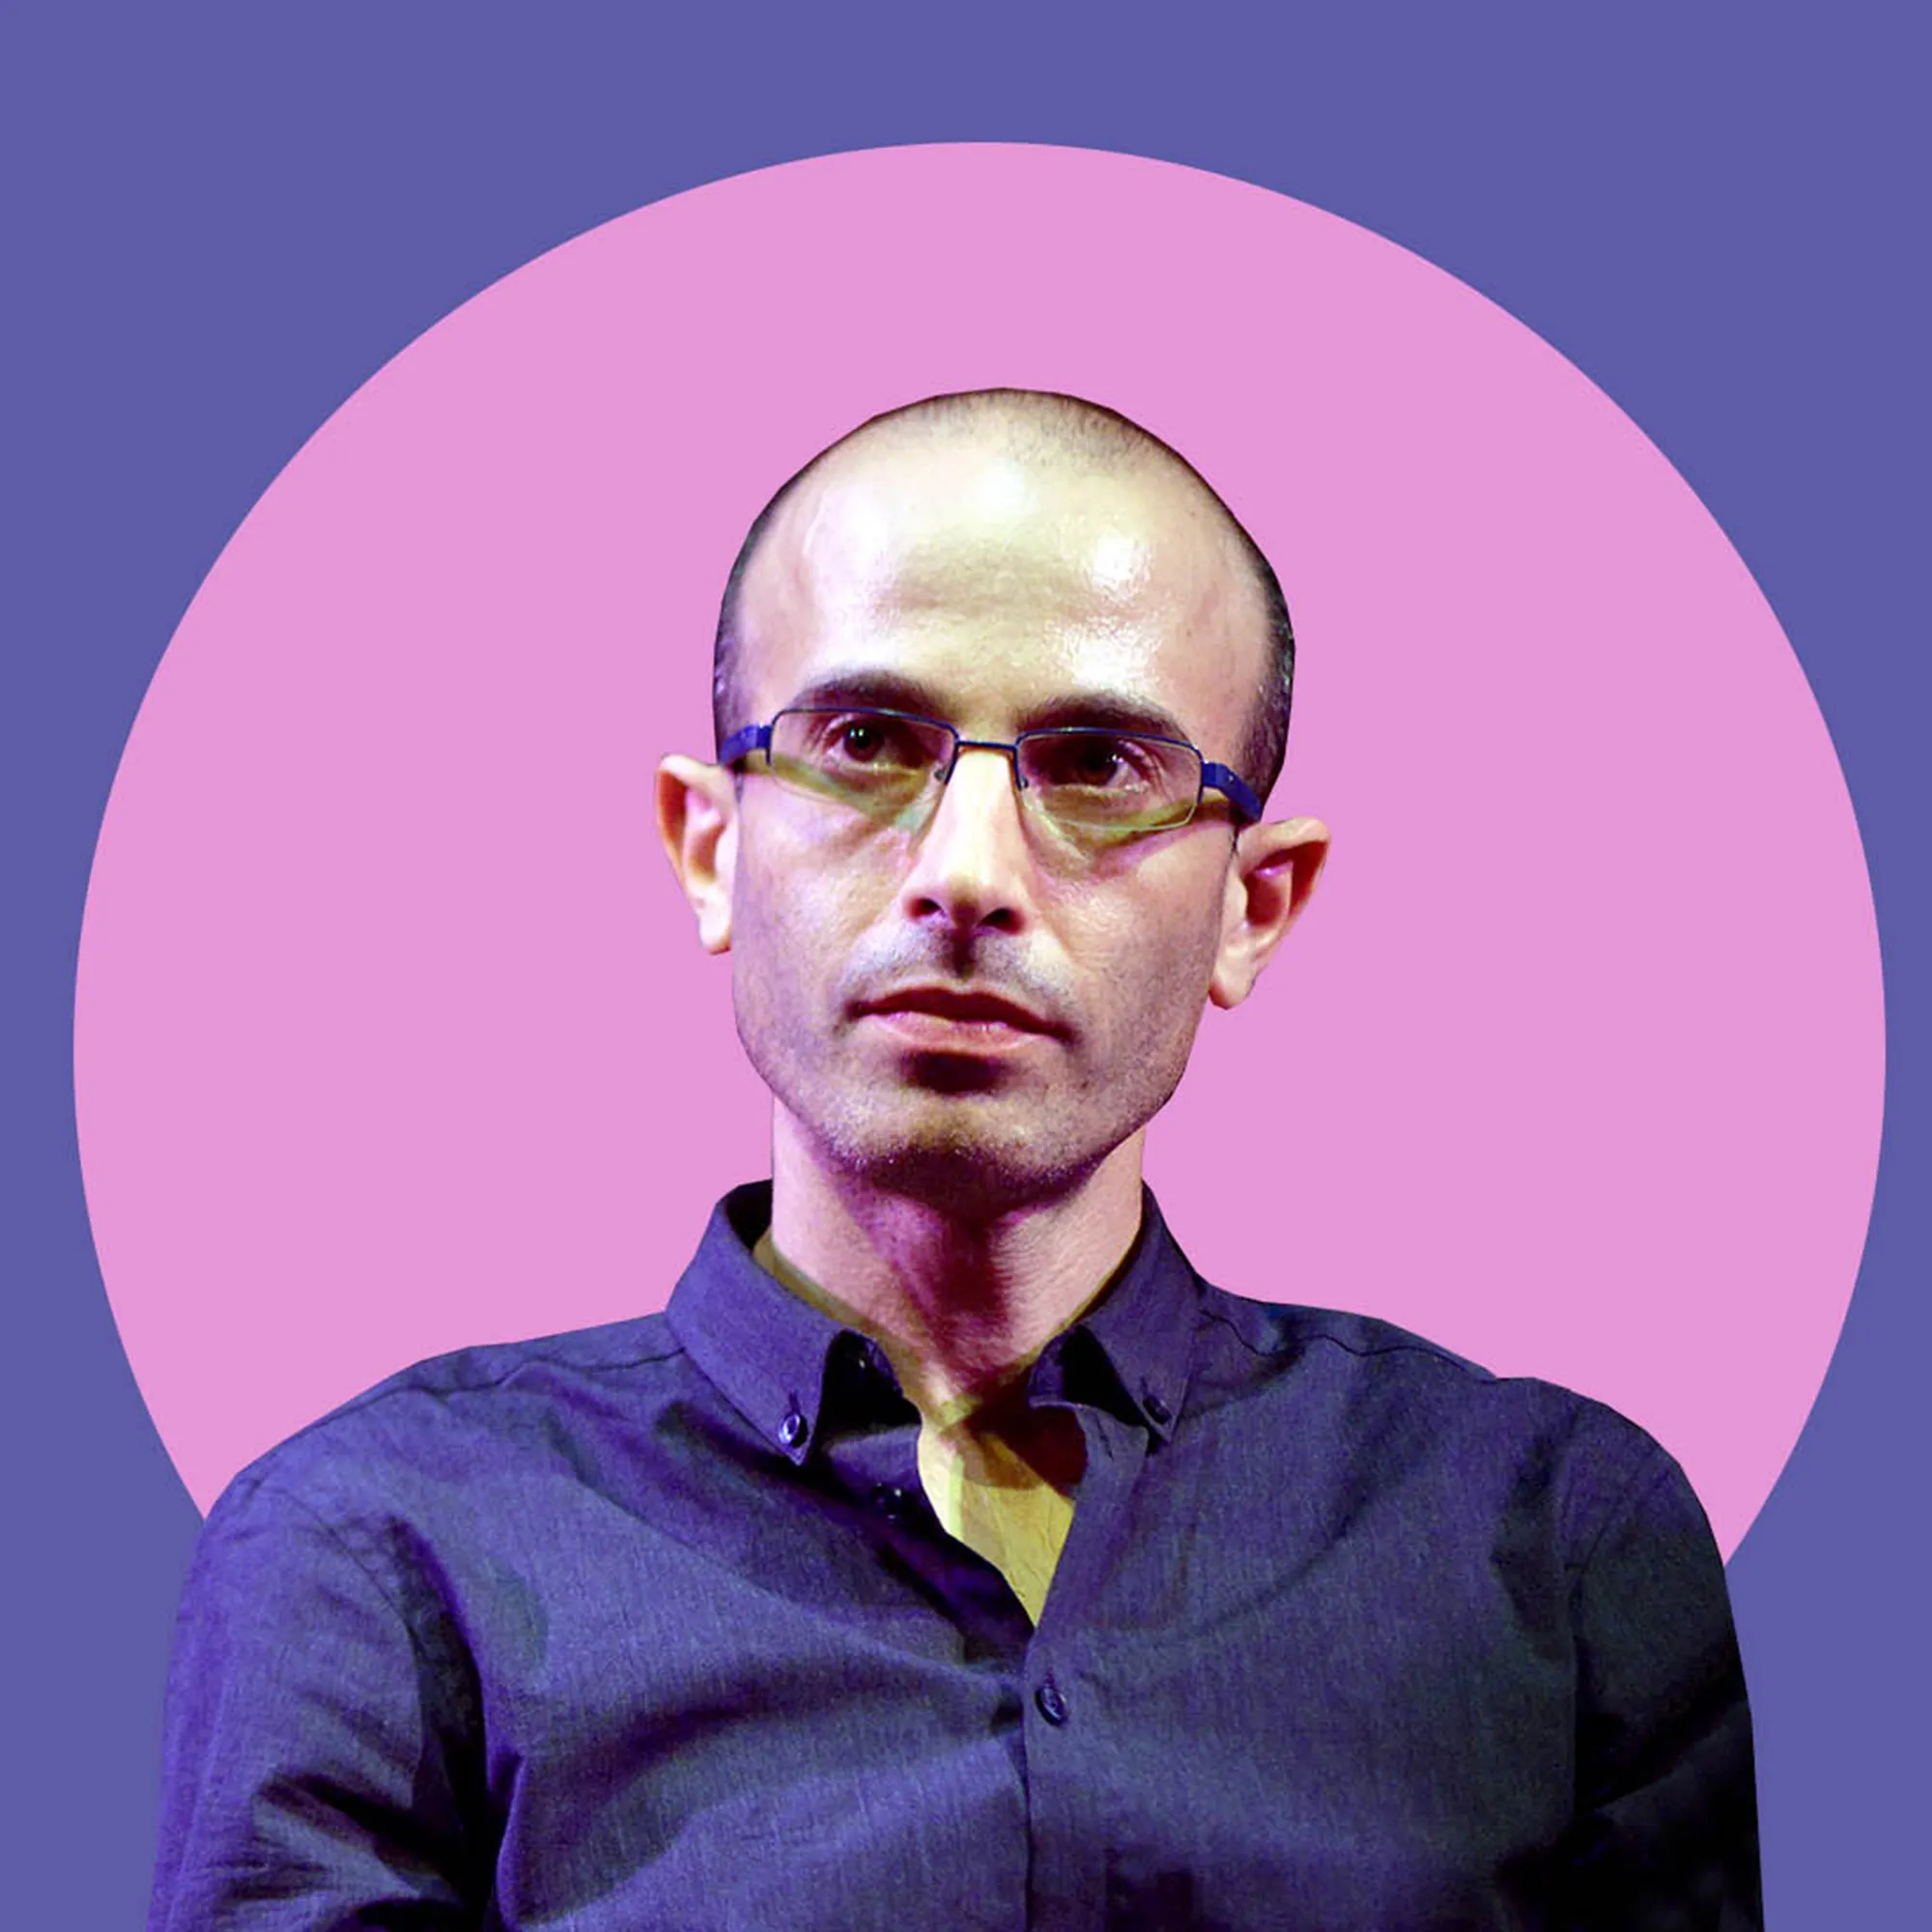 3 Harari Predictions That Will Blow Your Mind in 2024